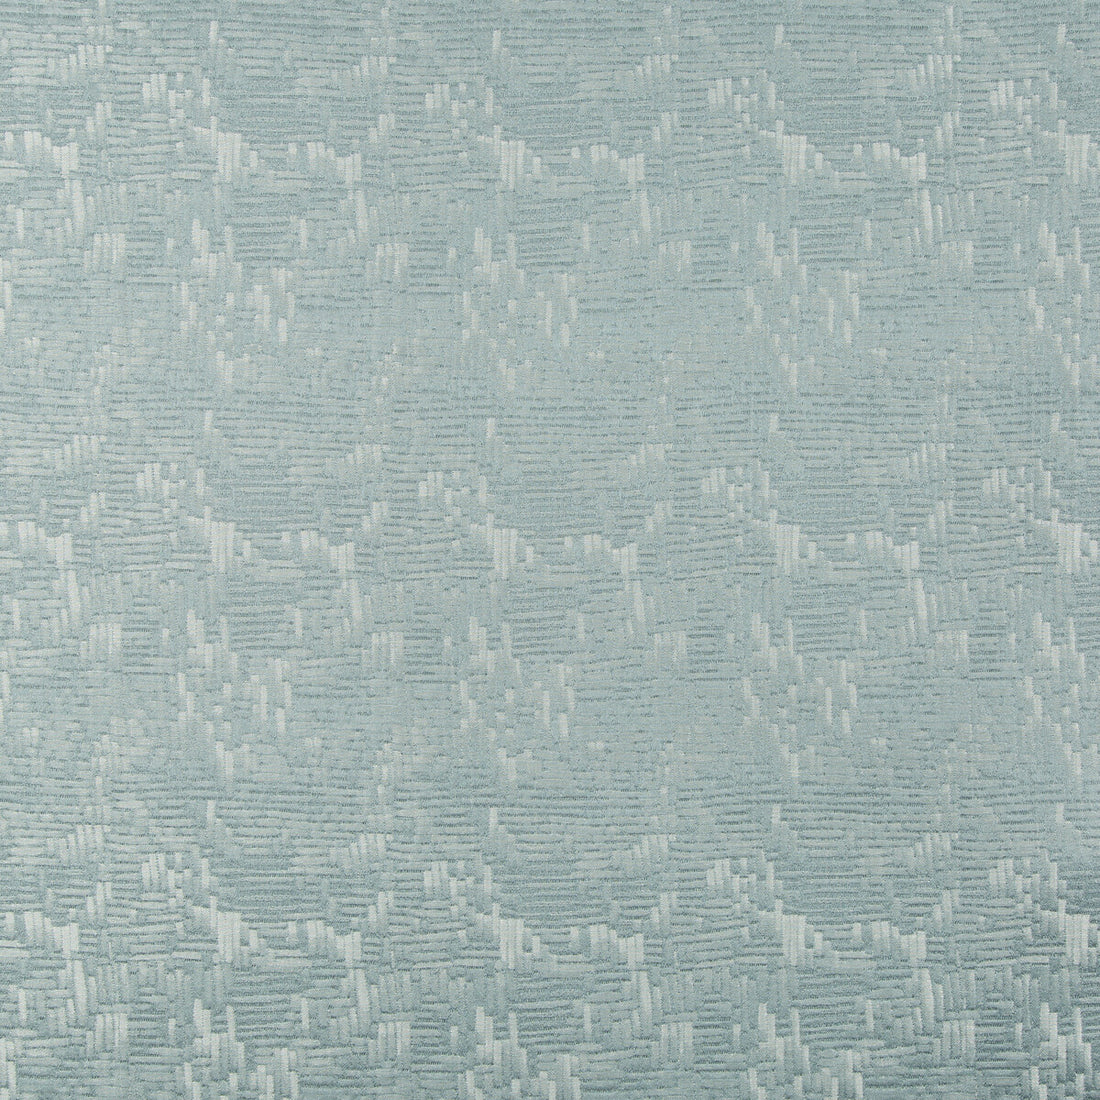 Ola fabric in oasis color - pattern 4797.5.0 - by Kravet Contract in the Kravet Cruise collection